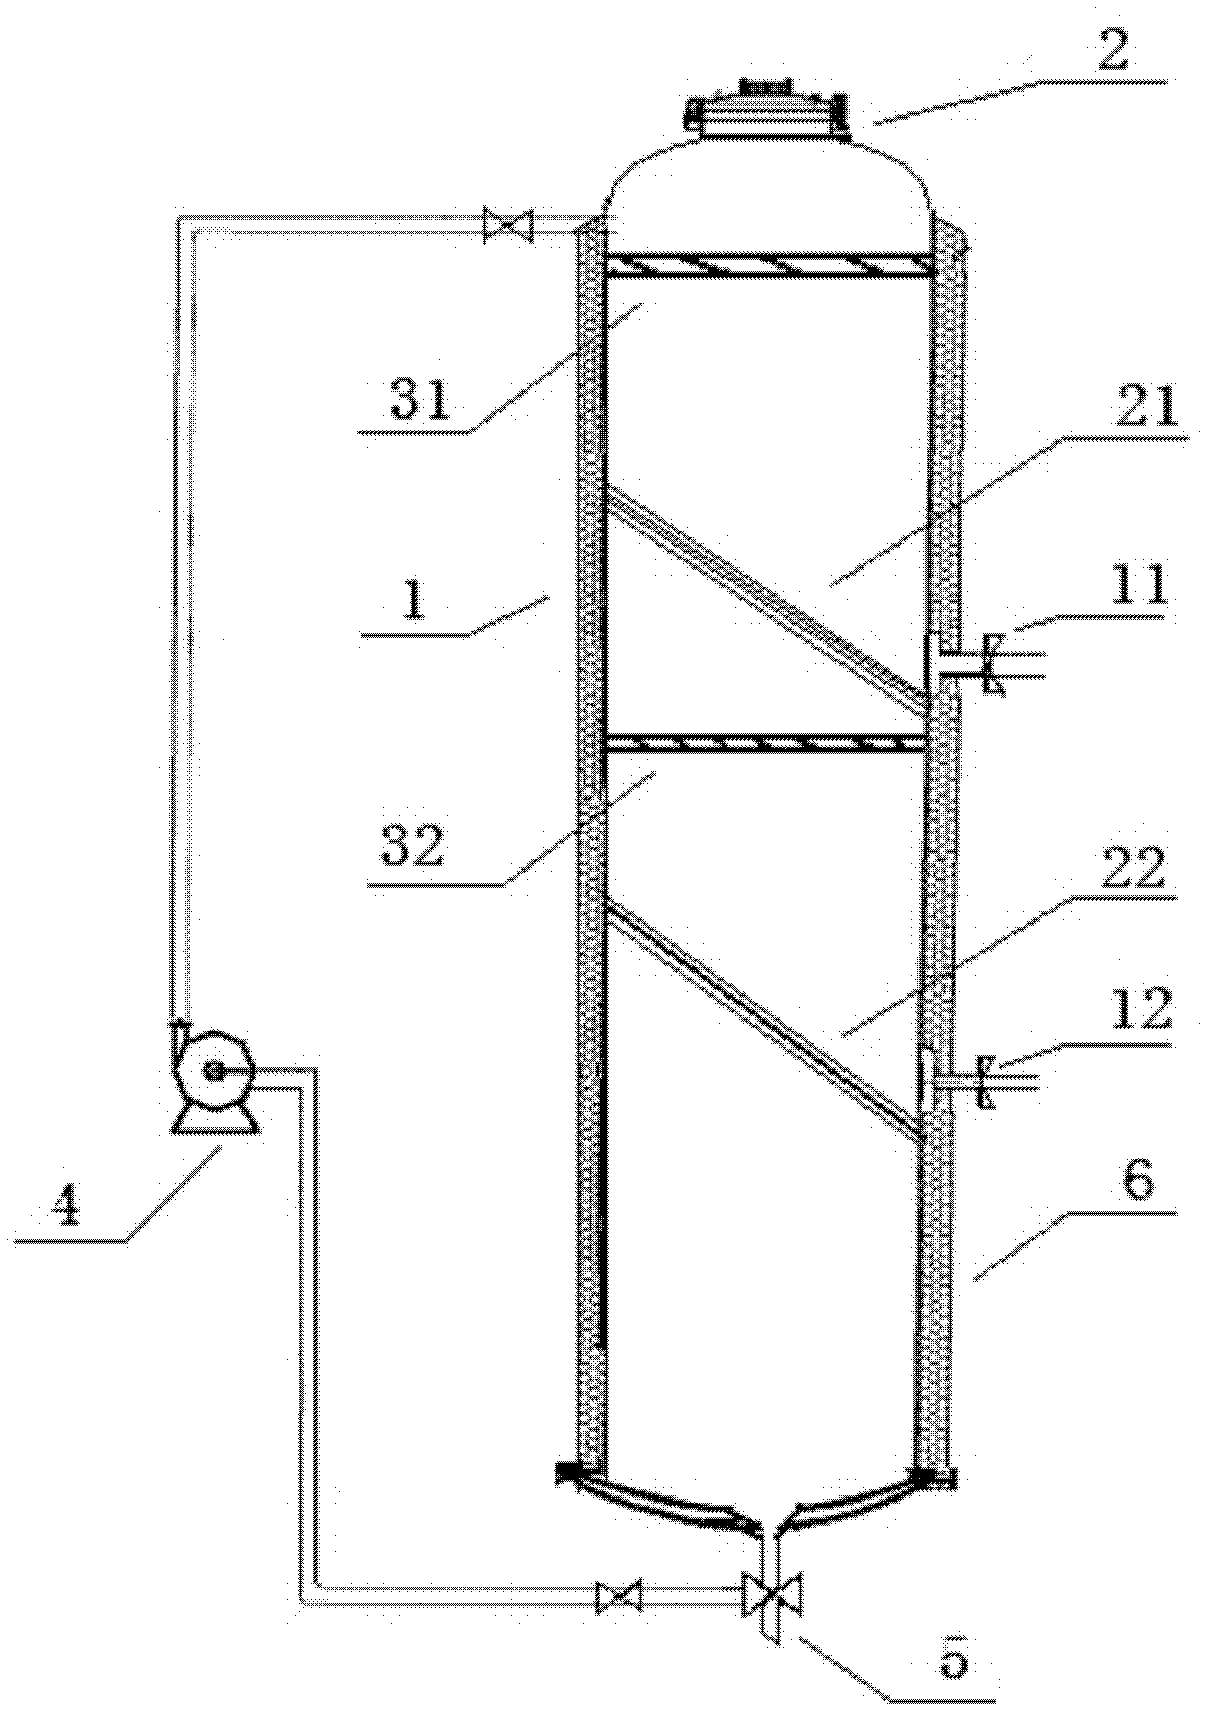 Biomimic membrane separation and extraction apparatus